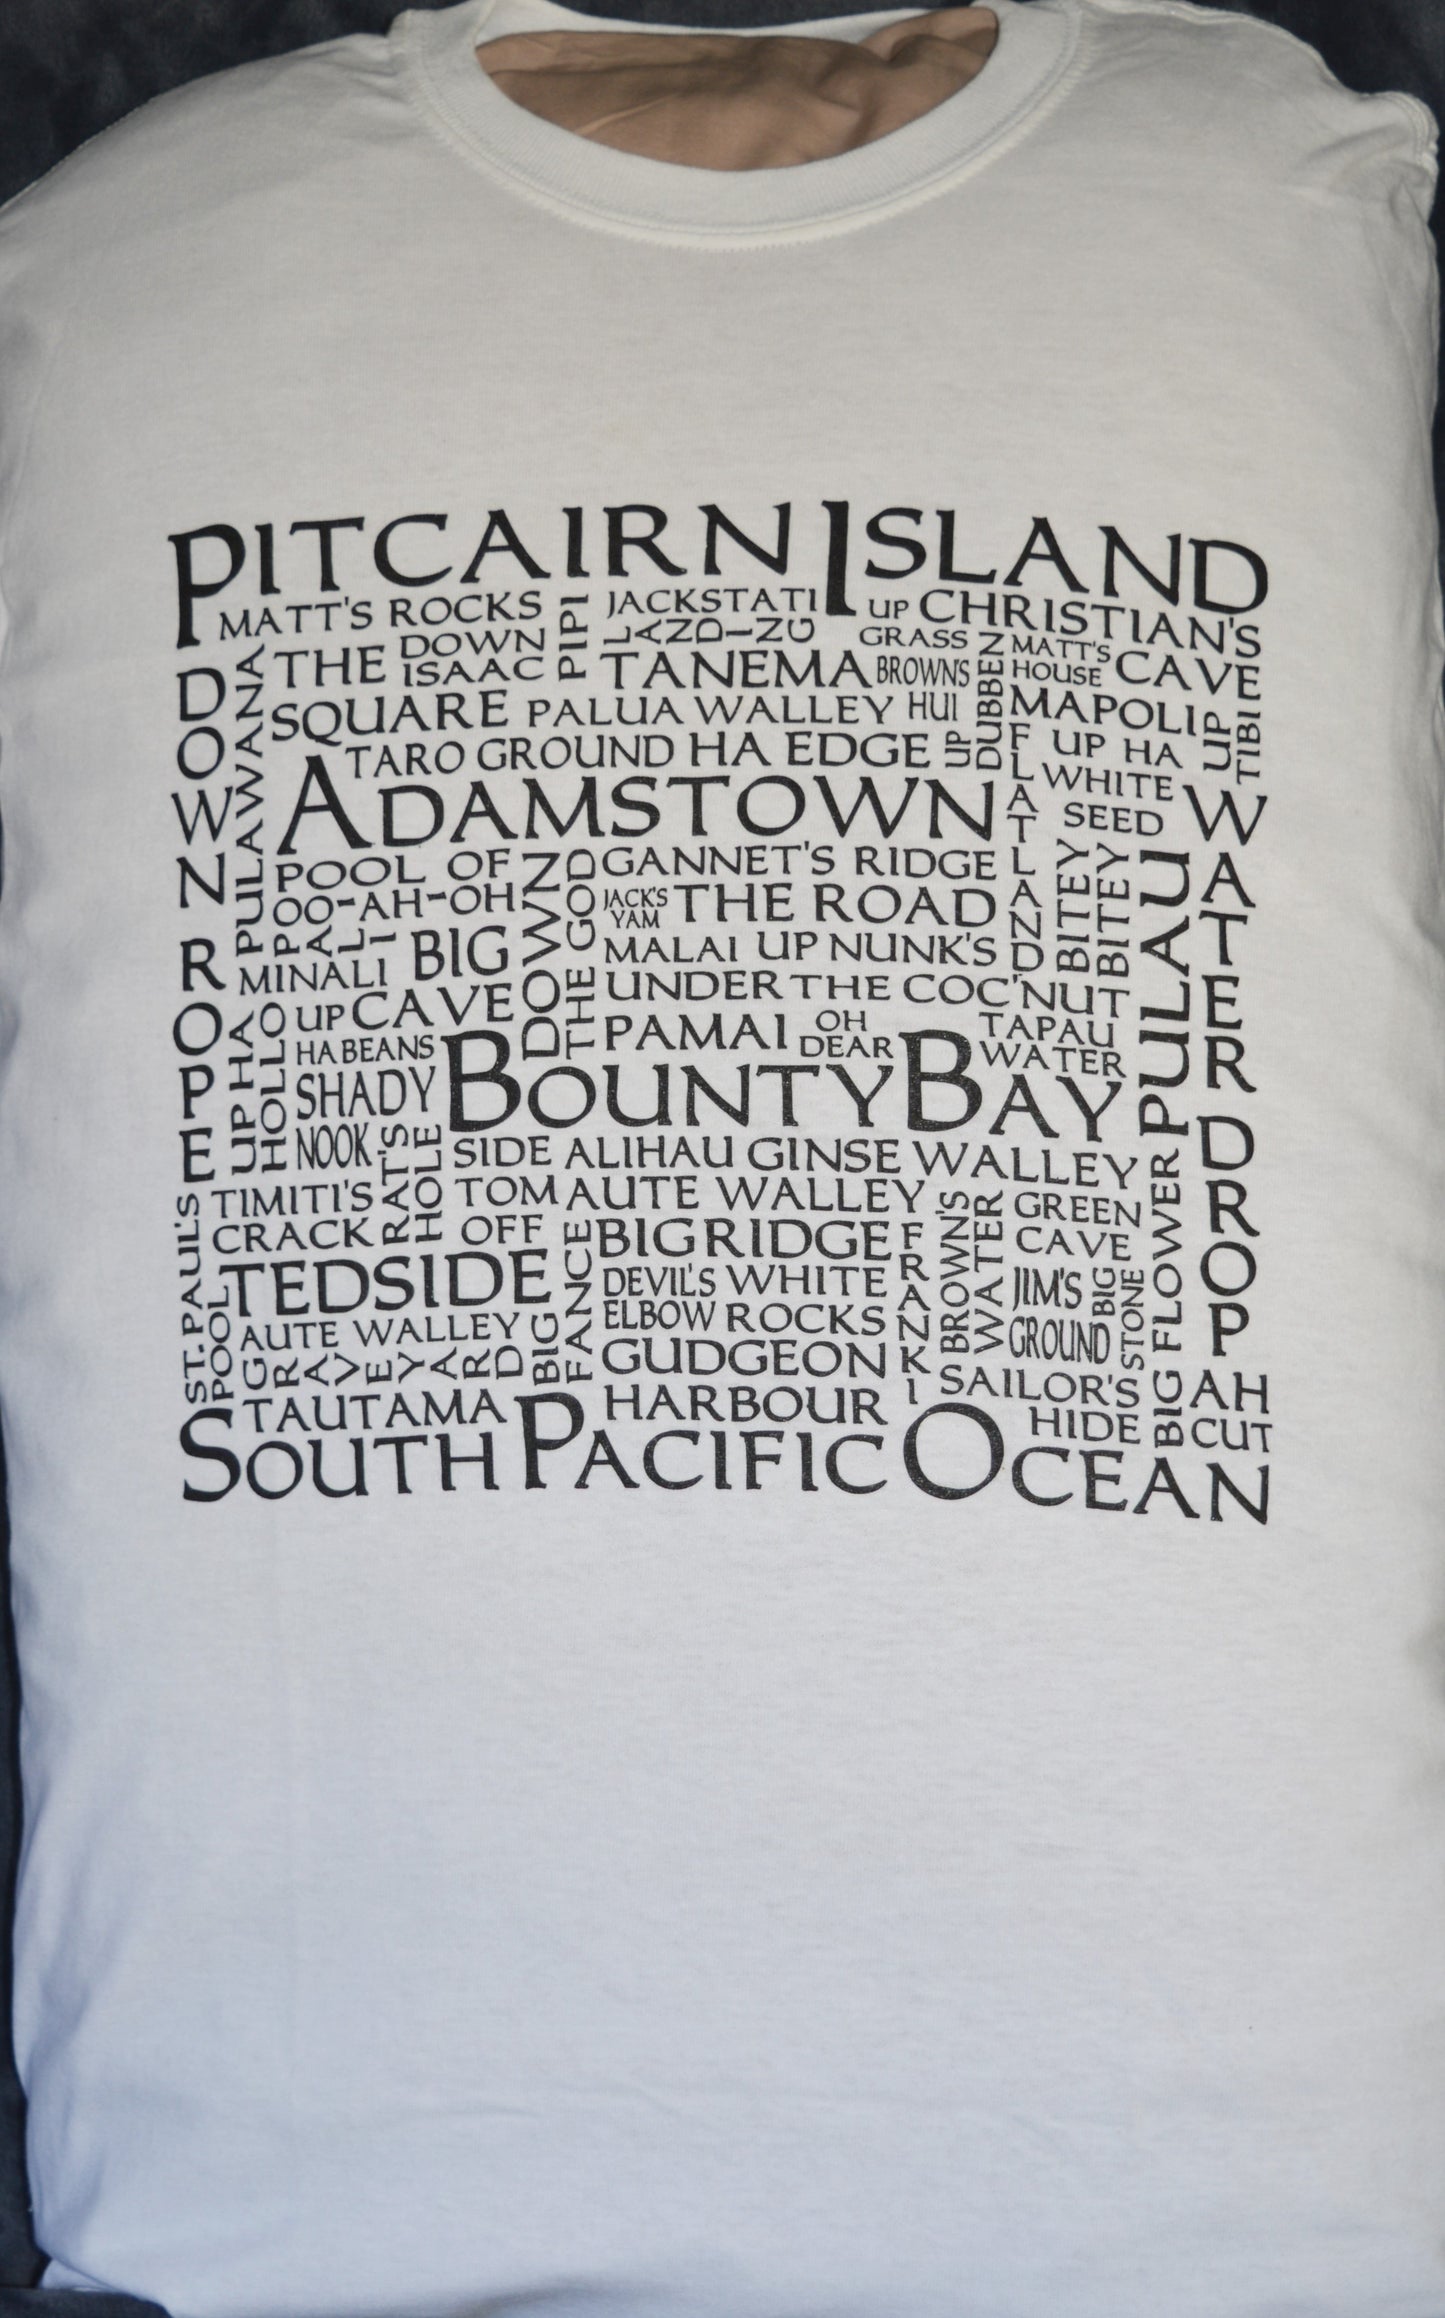 Pitcairn Island branded clothing